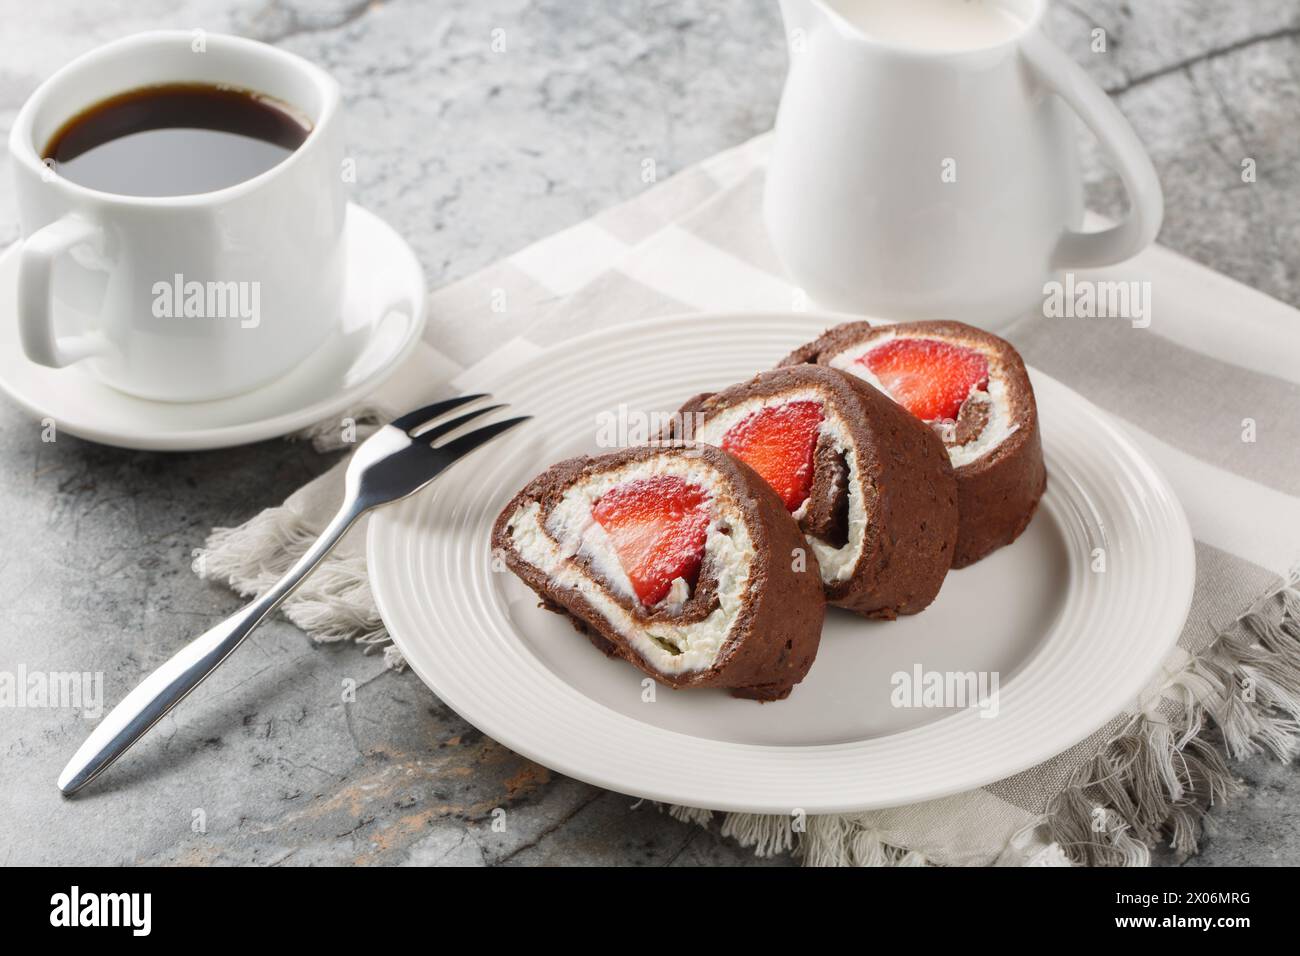 Chocolate cake roll with fresh strawberries and cream cheese closeup on a marble background. Horizontal Stock Photo